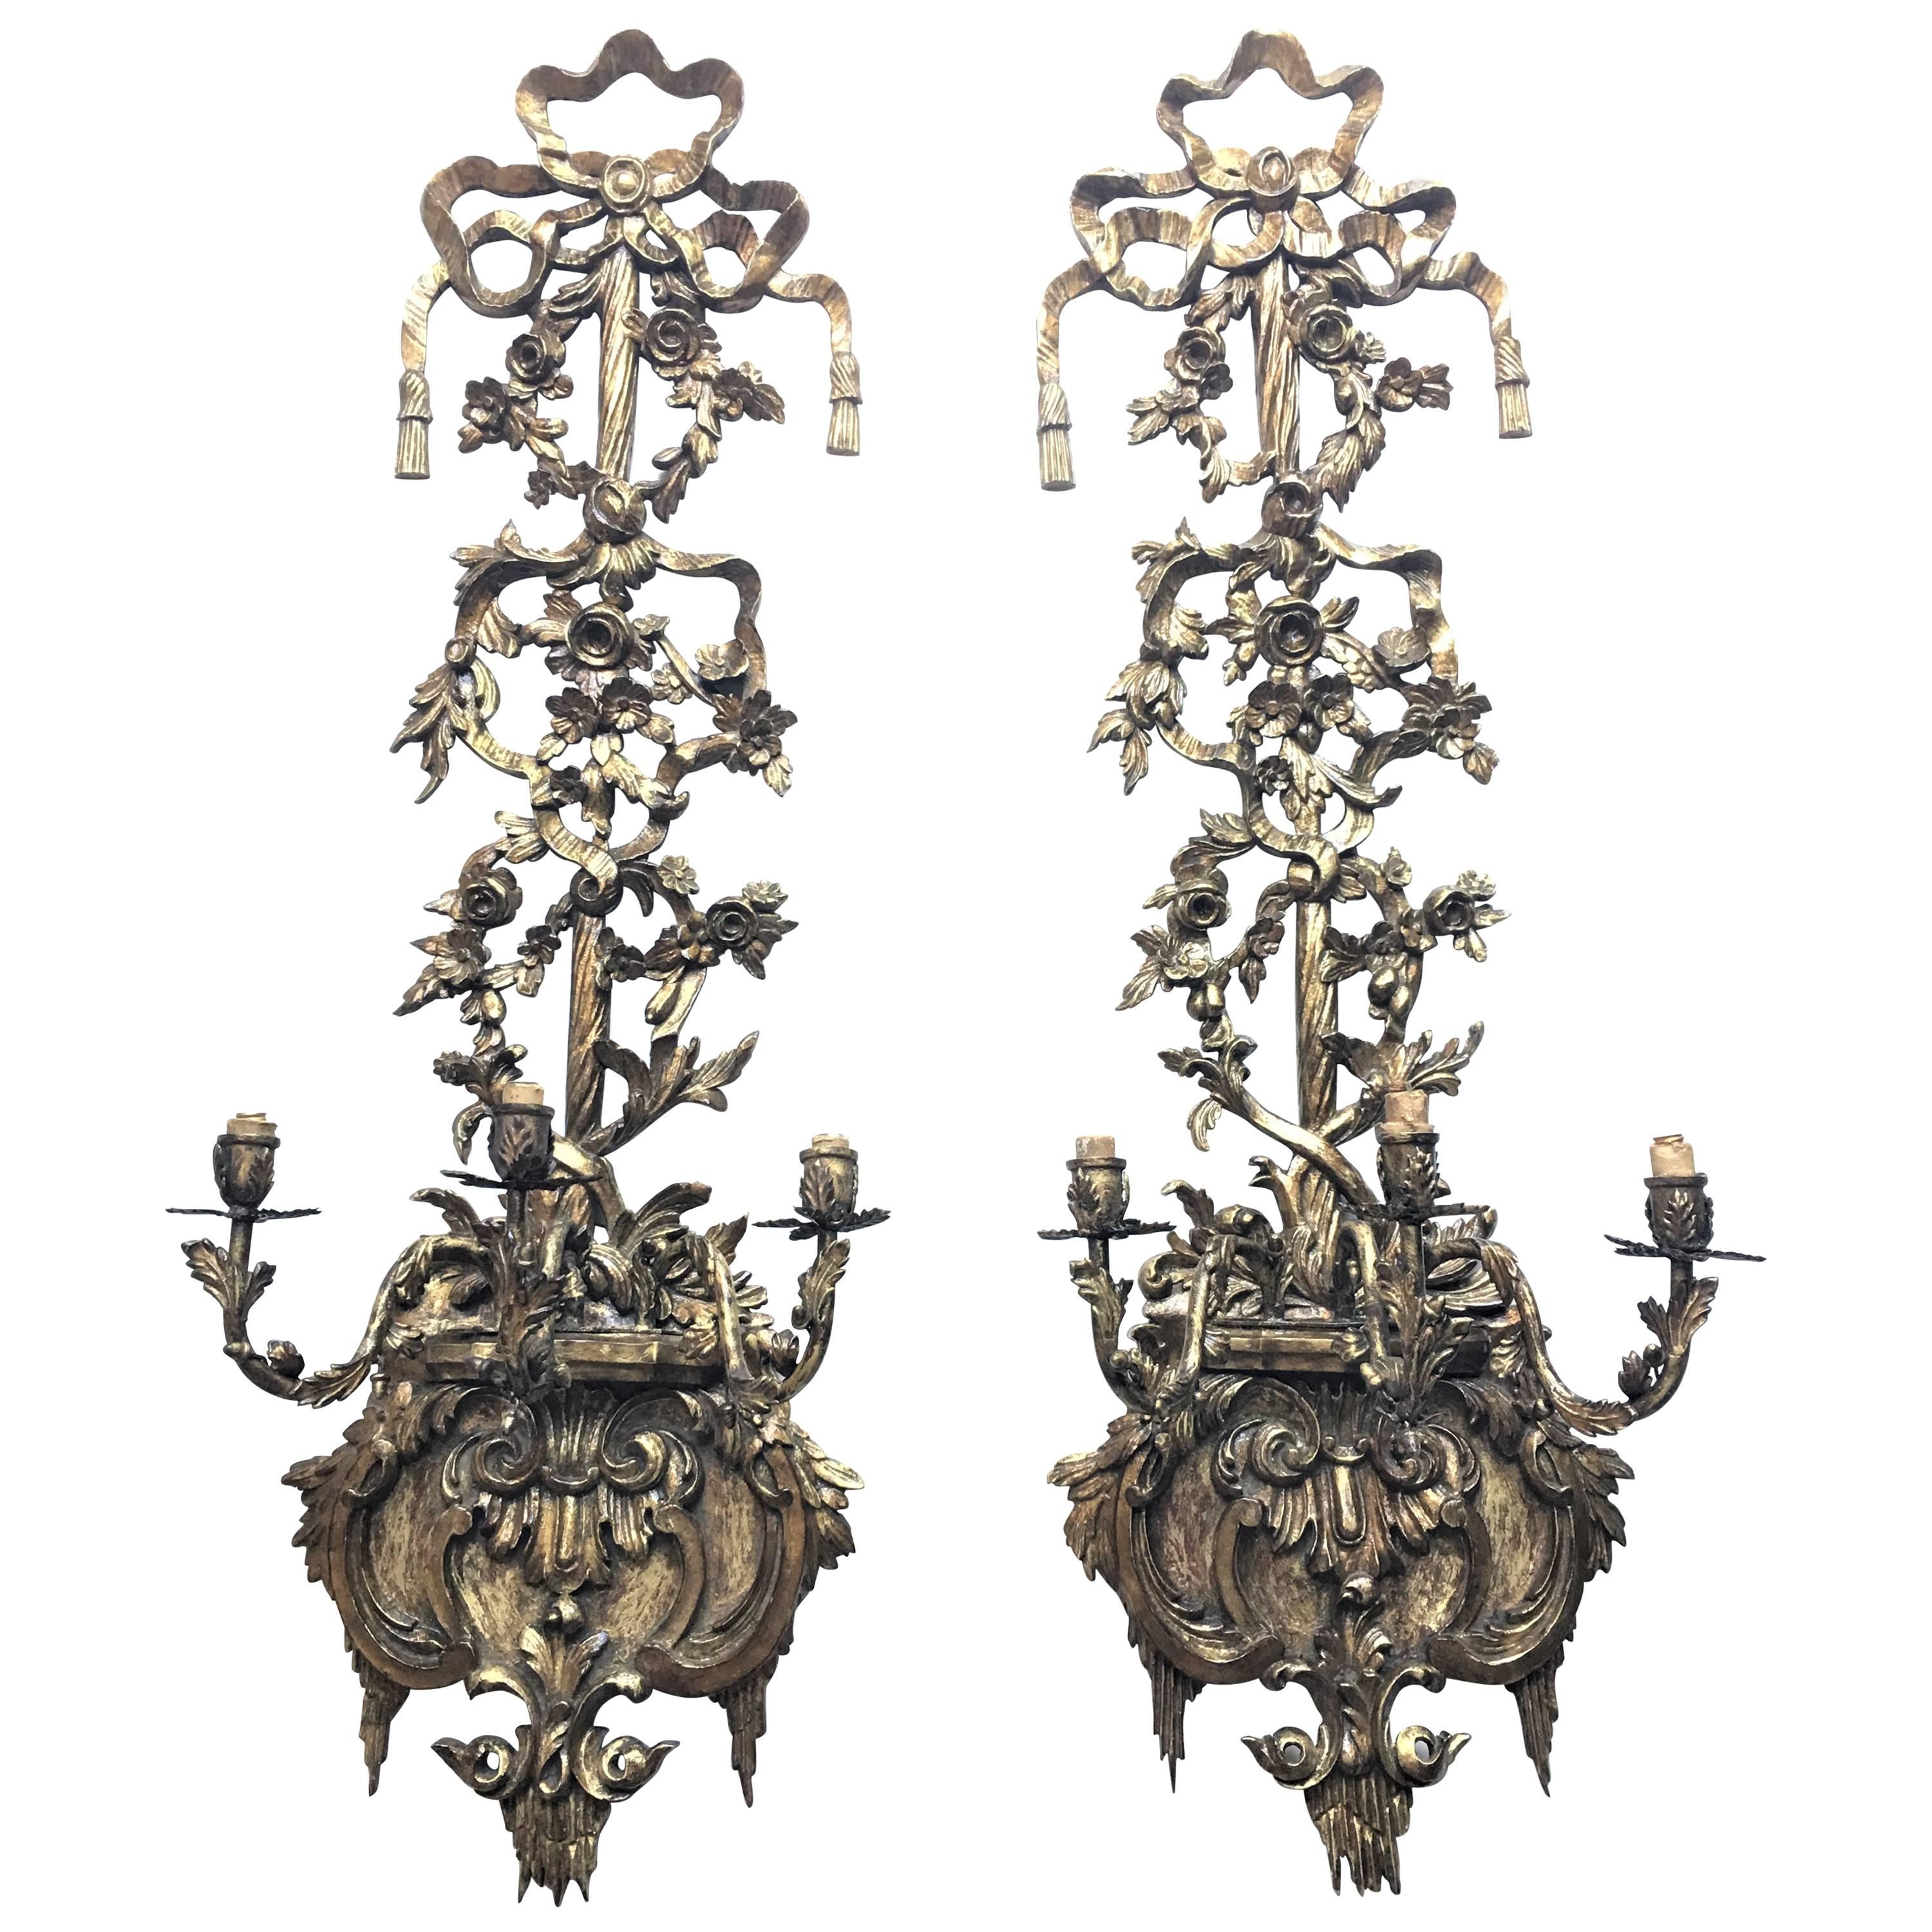 Pair of 19th Century Regency Carved Giltwood Sconces or Wall Appliques For Sale